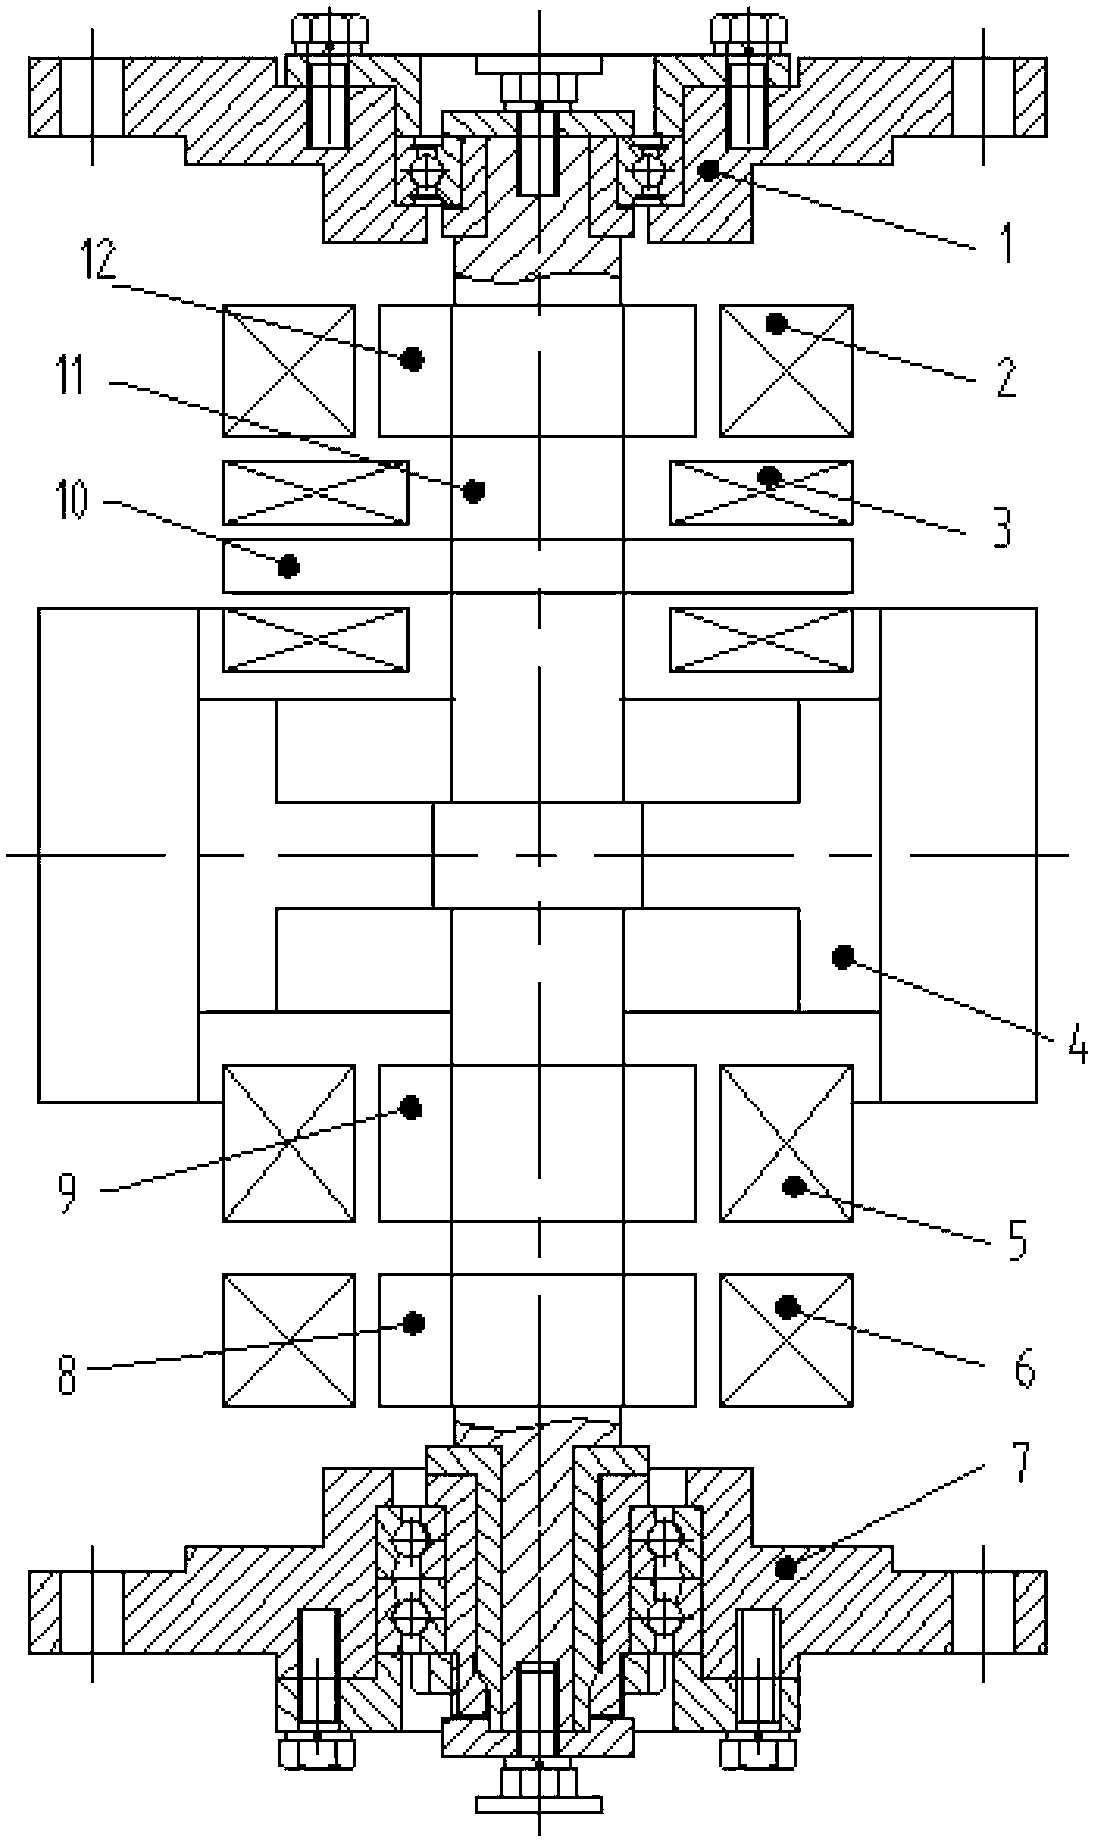 Auxiliary support for vertical magnetic suspension flywheel rotor